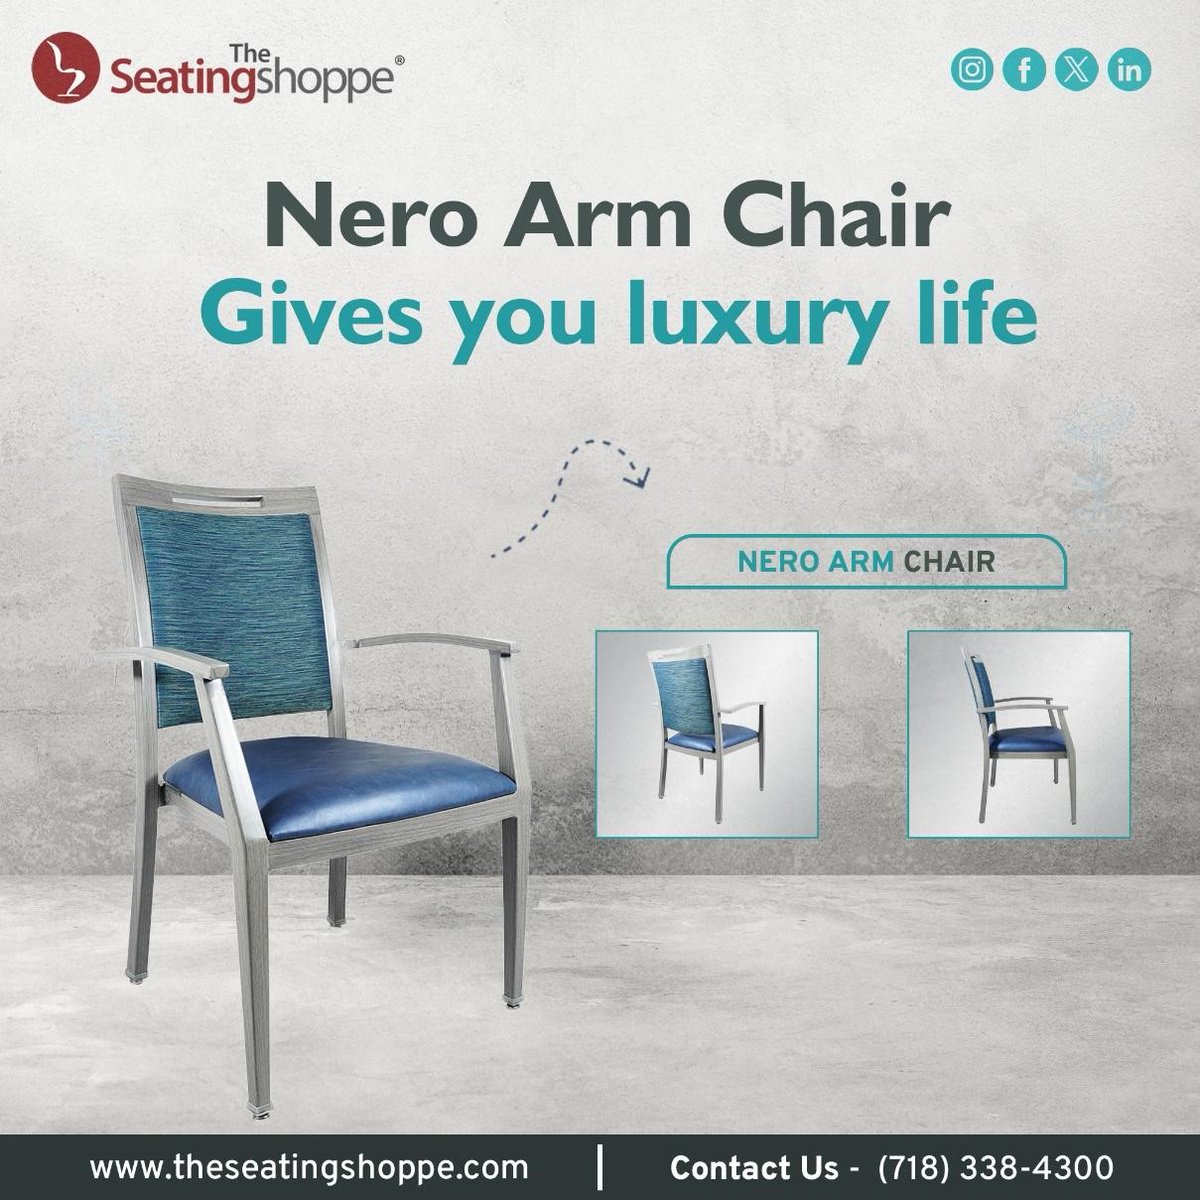 Meet the Nero Arm Chair: Unrivaled Comfort & Versatility! 🪑

Order yours now! - bitly.ws/32zCt

#TheSeatingShoppe #NeroArmChair #ComfortandVersatility #AssistedLiving #NursingHomes #RetirementHomes #FurnitureSolutions #QualitySeating #InteriorDesign